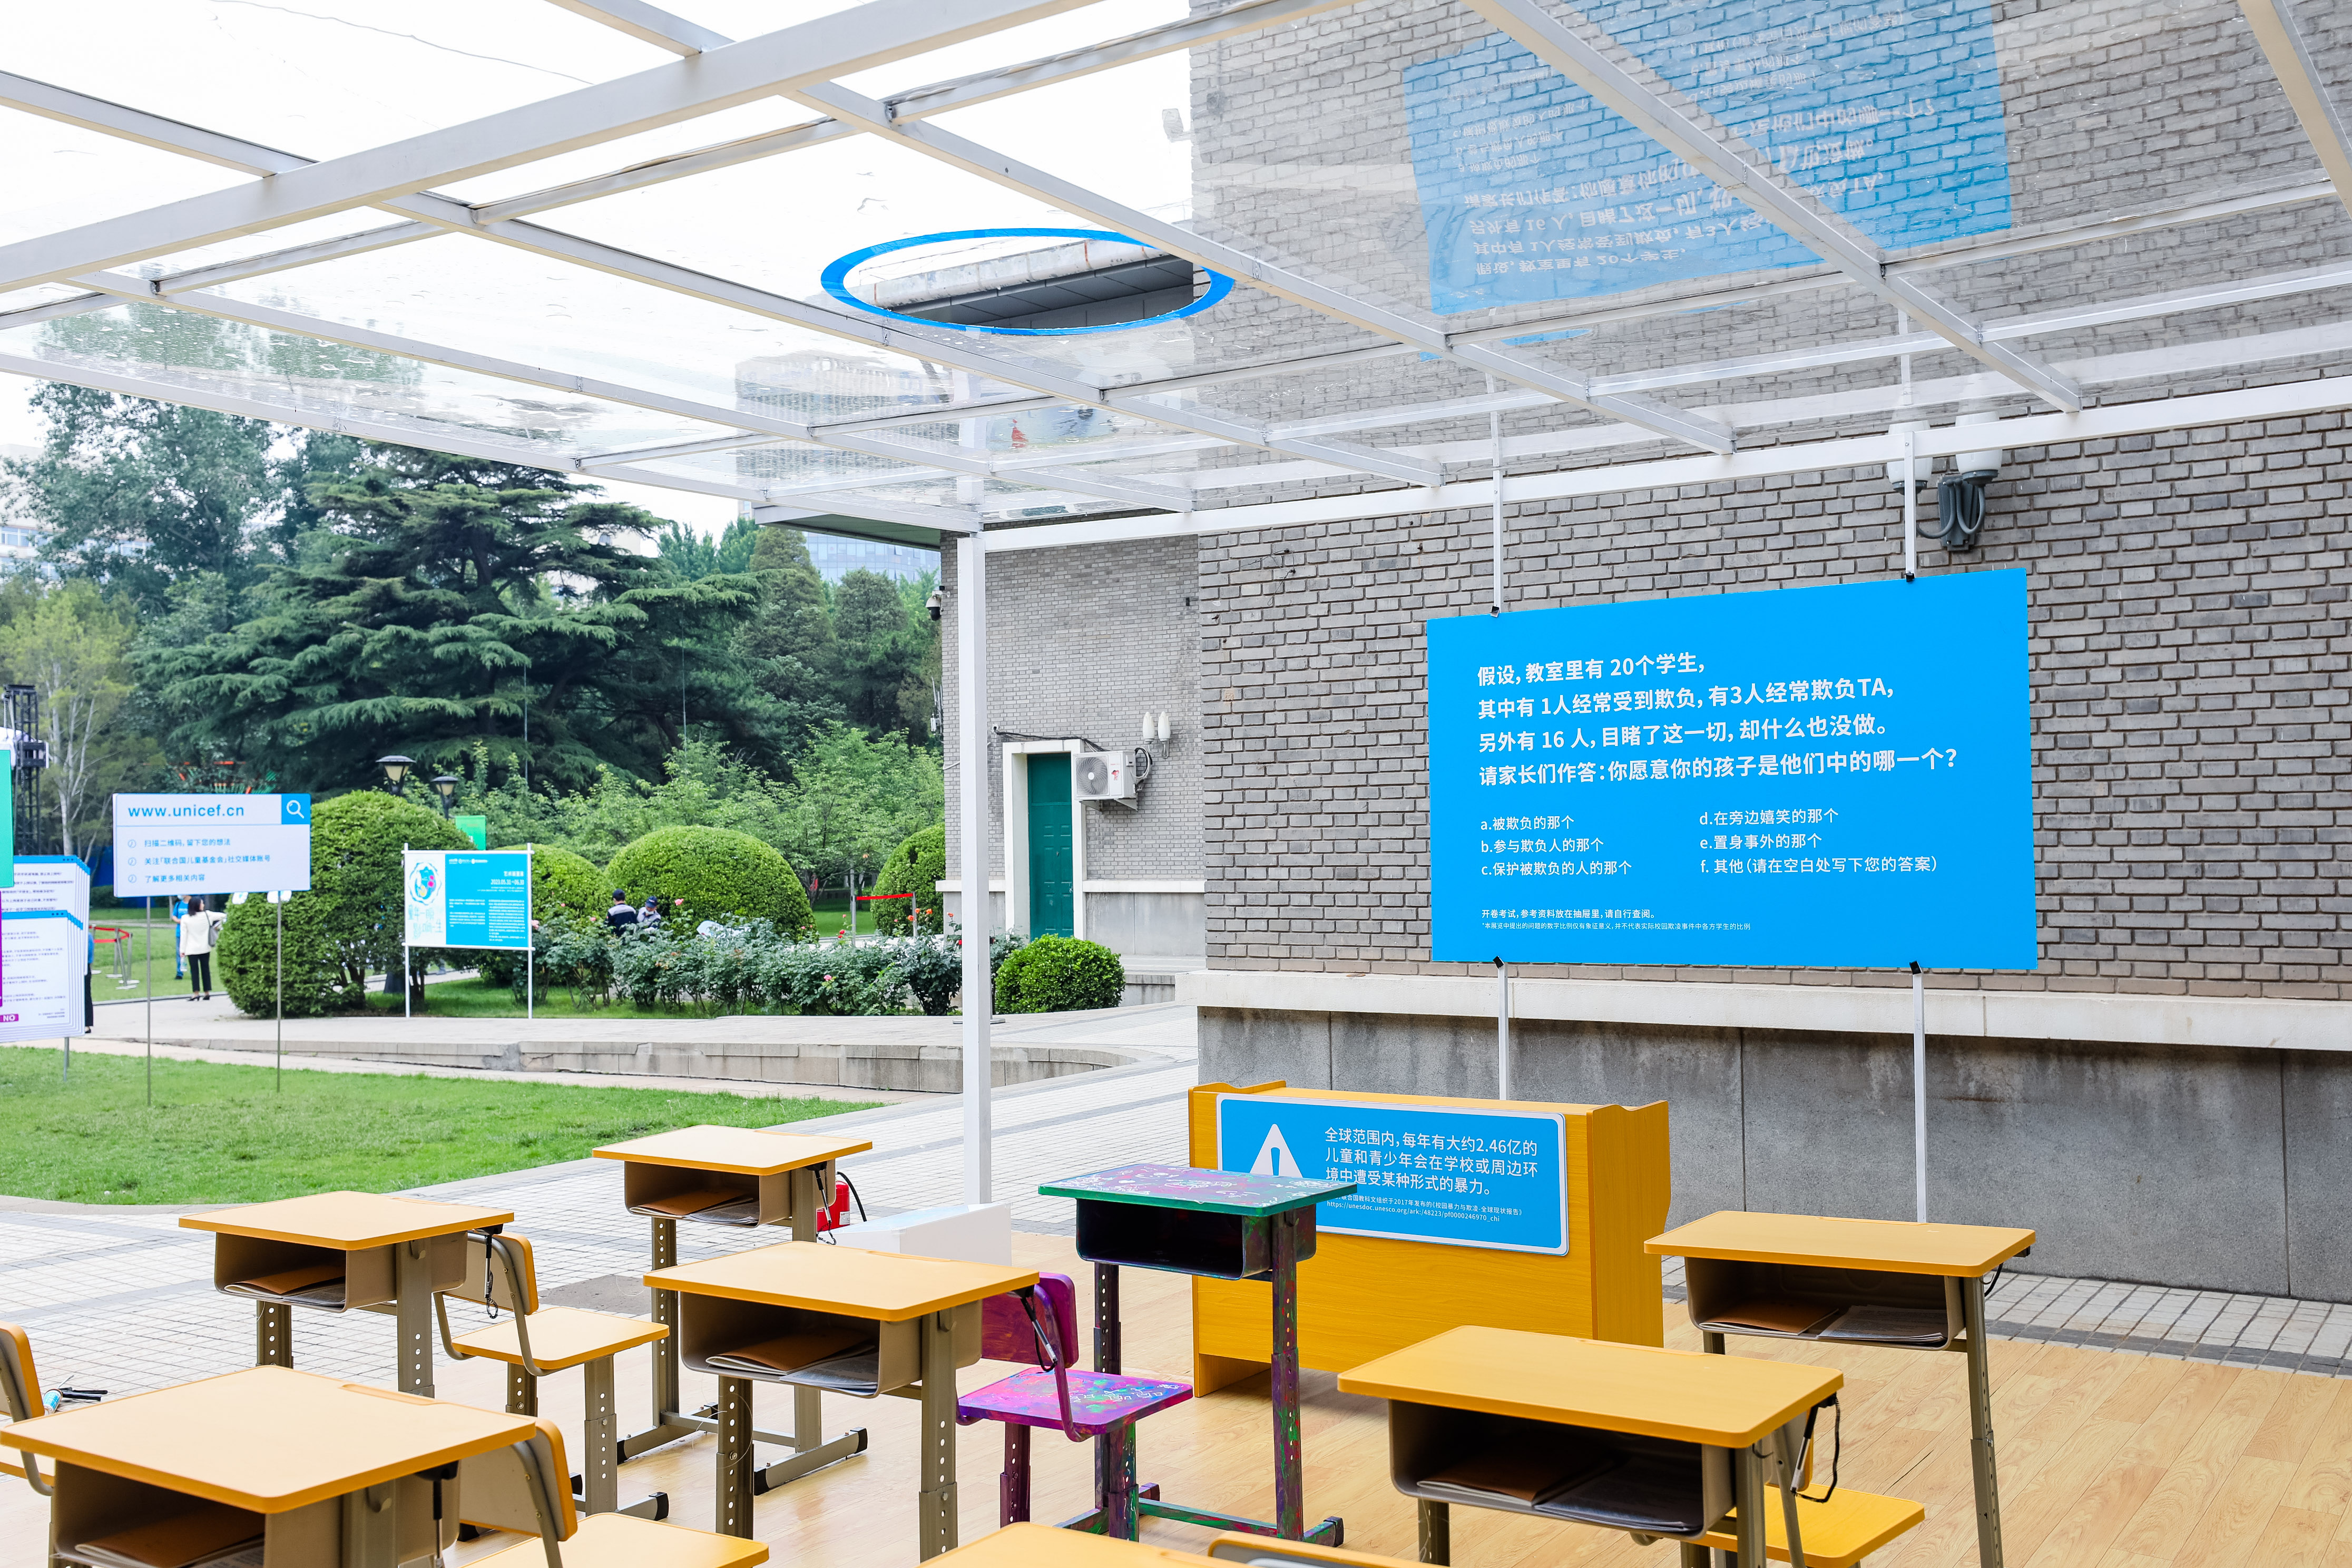 An art installation portraying children's experiences in the school setting is on display at the China National Children's Center in Beijing on May 31, 2023. Questions about a possible school bullying scenario are posed on blue boards of the installation to raise awareness of the importance of providing a safe environment for children at school. /UNICEF